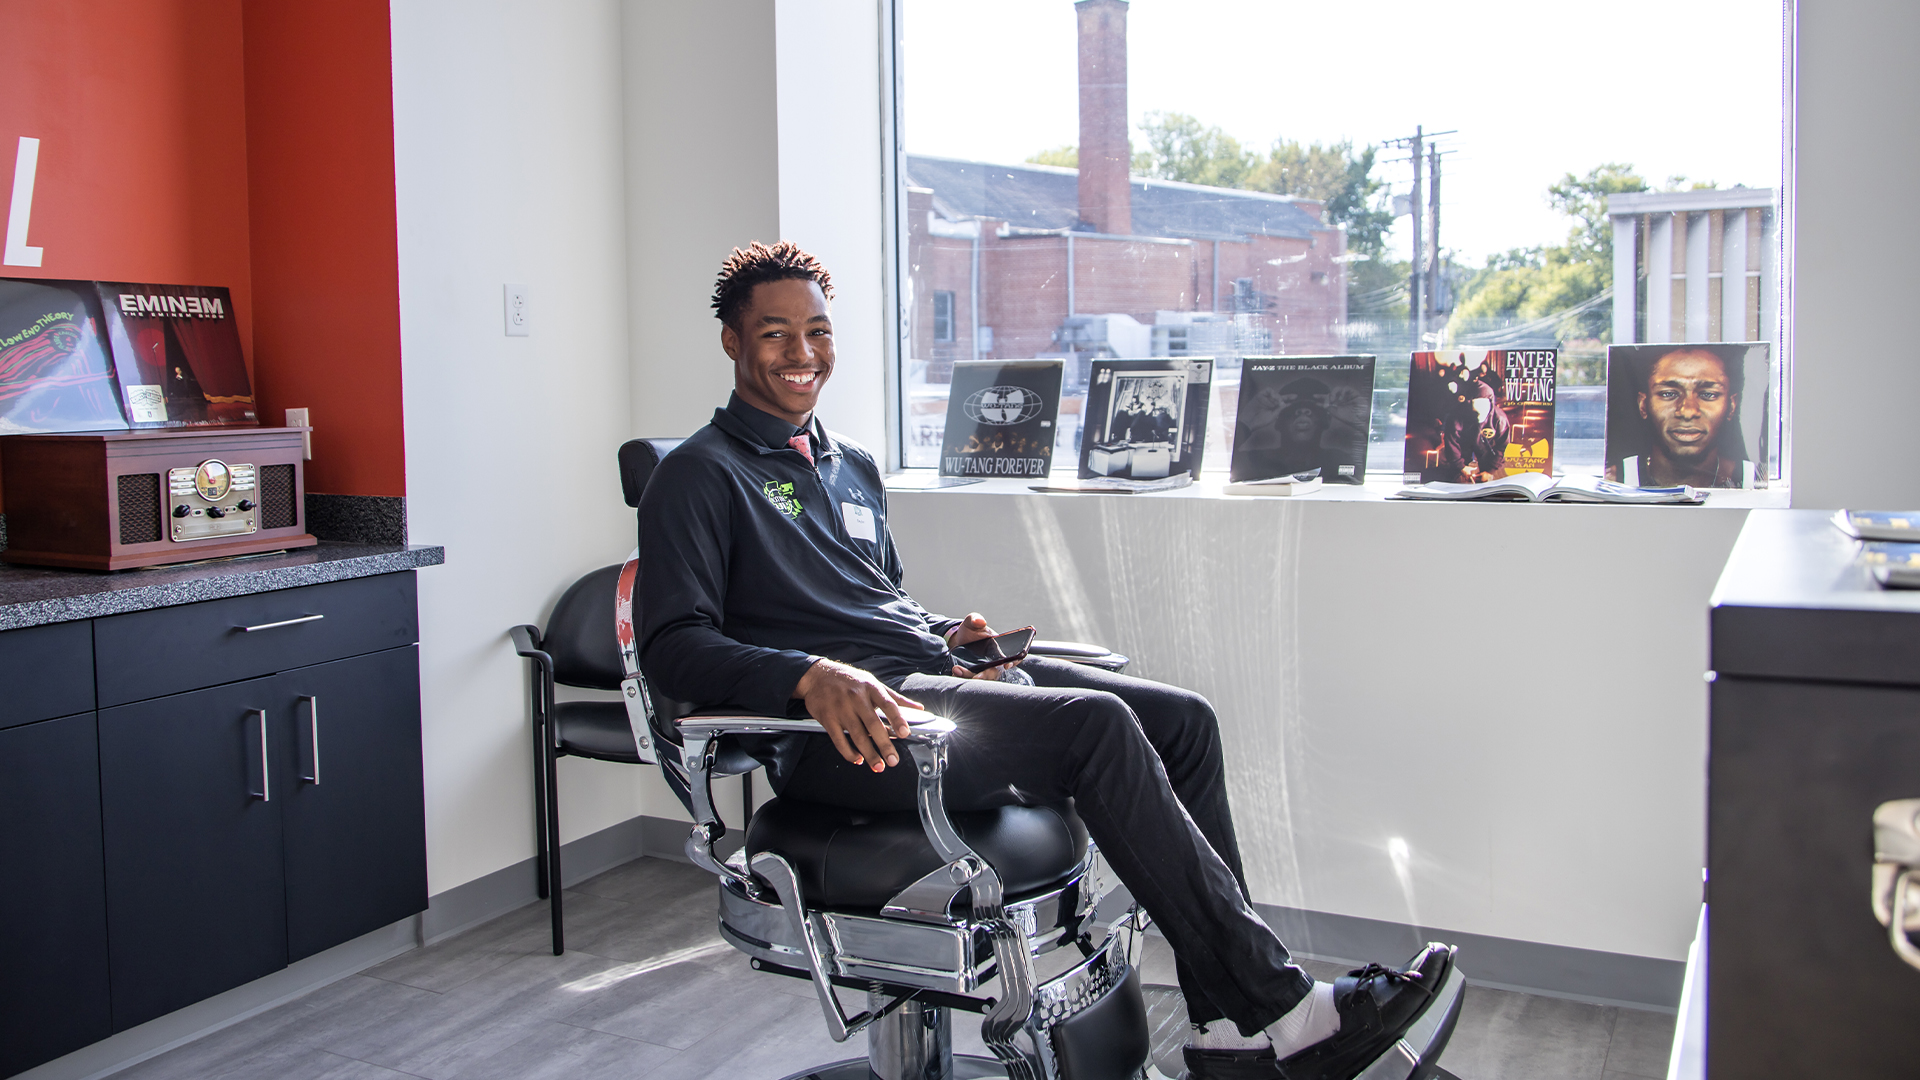 Ahead Of Opening His Own Barbershop In The Future, Here's How This 19-Year-Old Is Providing Free Haircuts To His Community